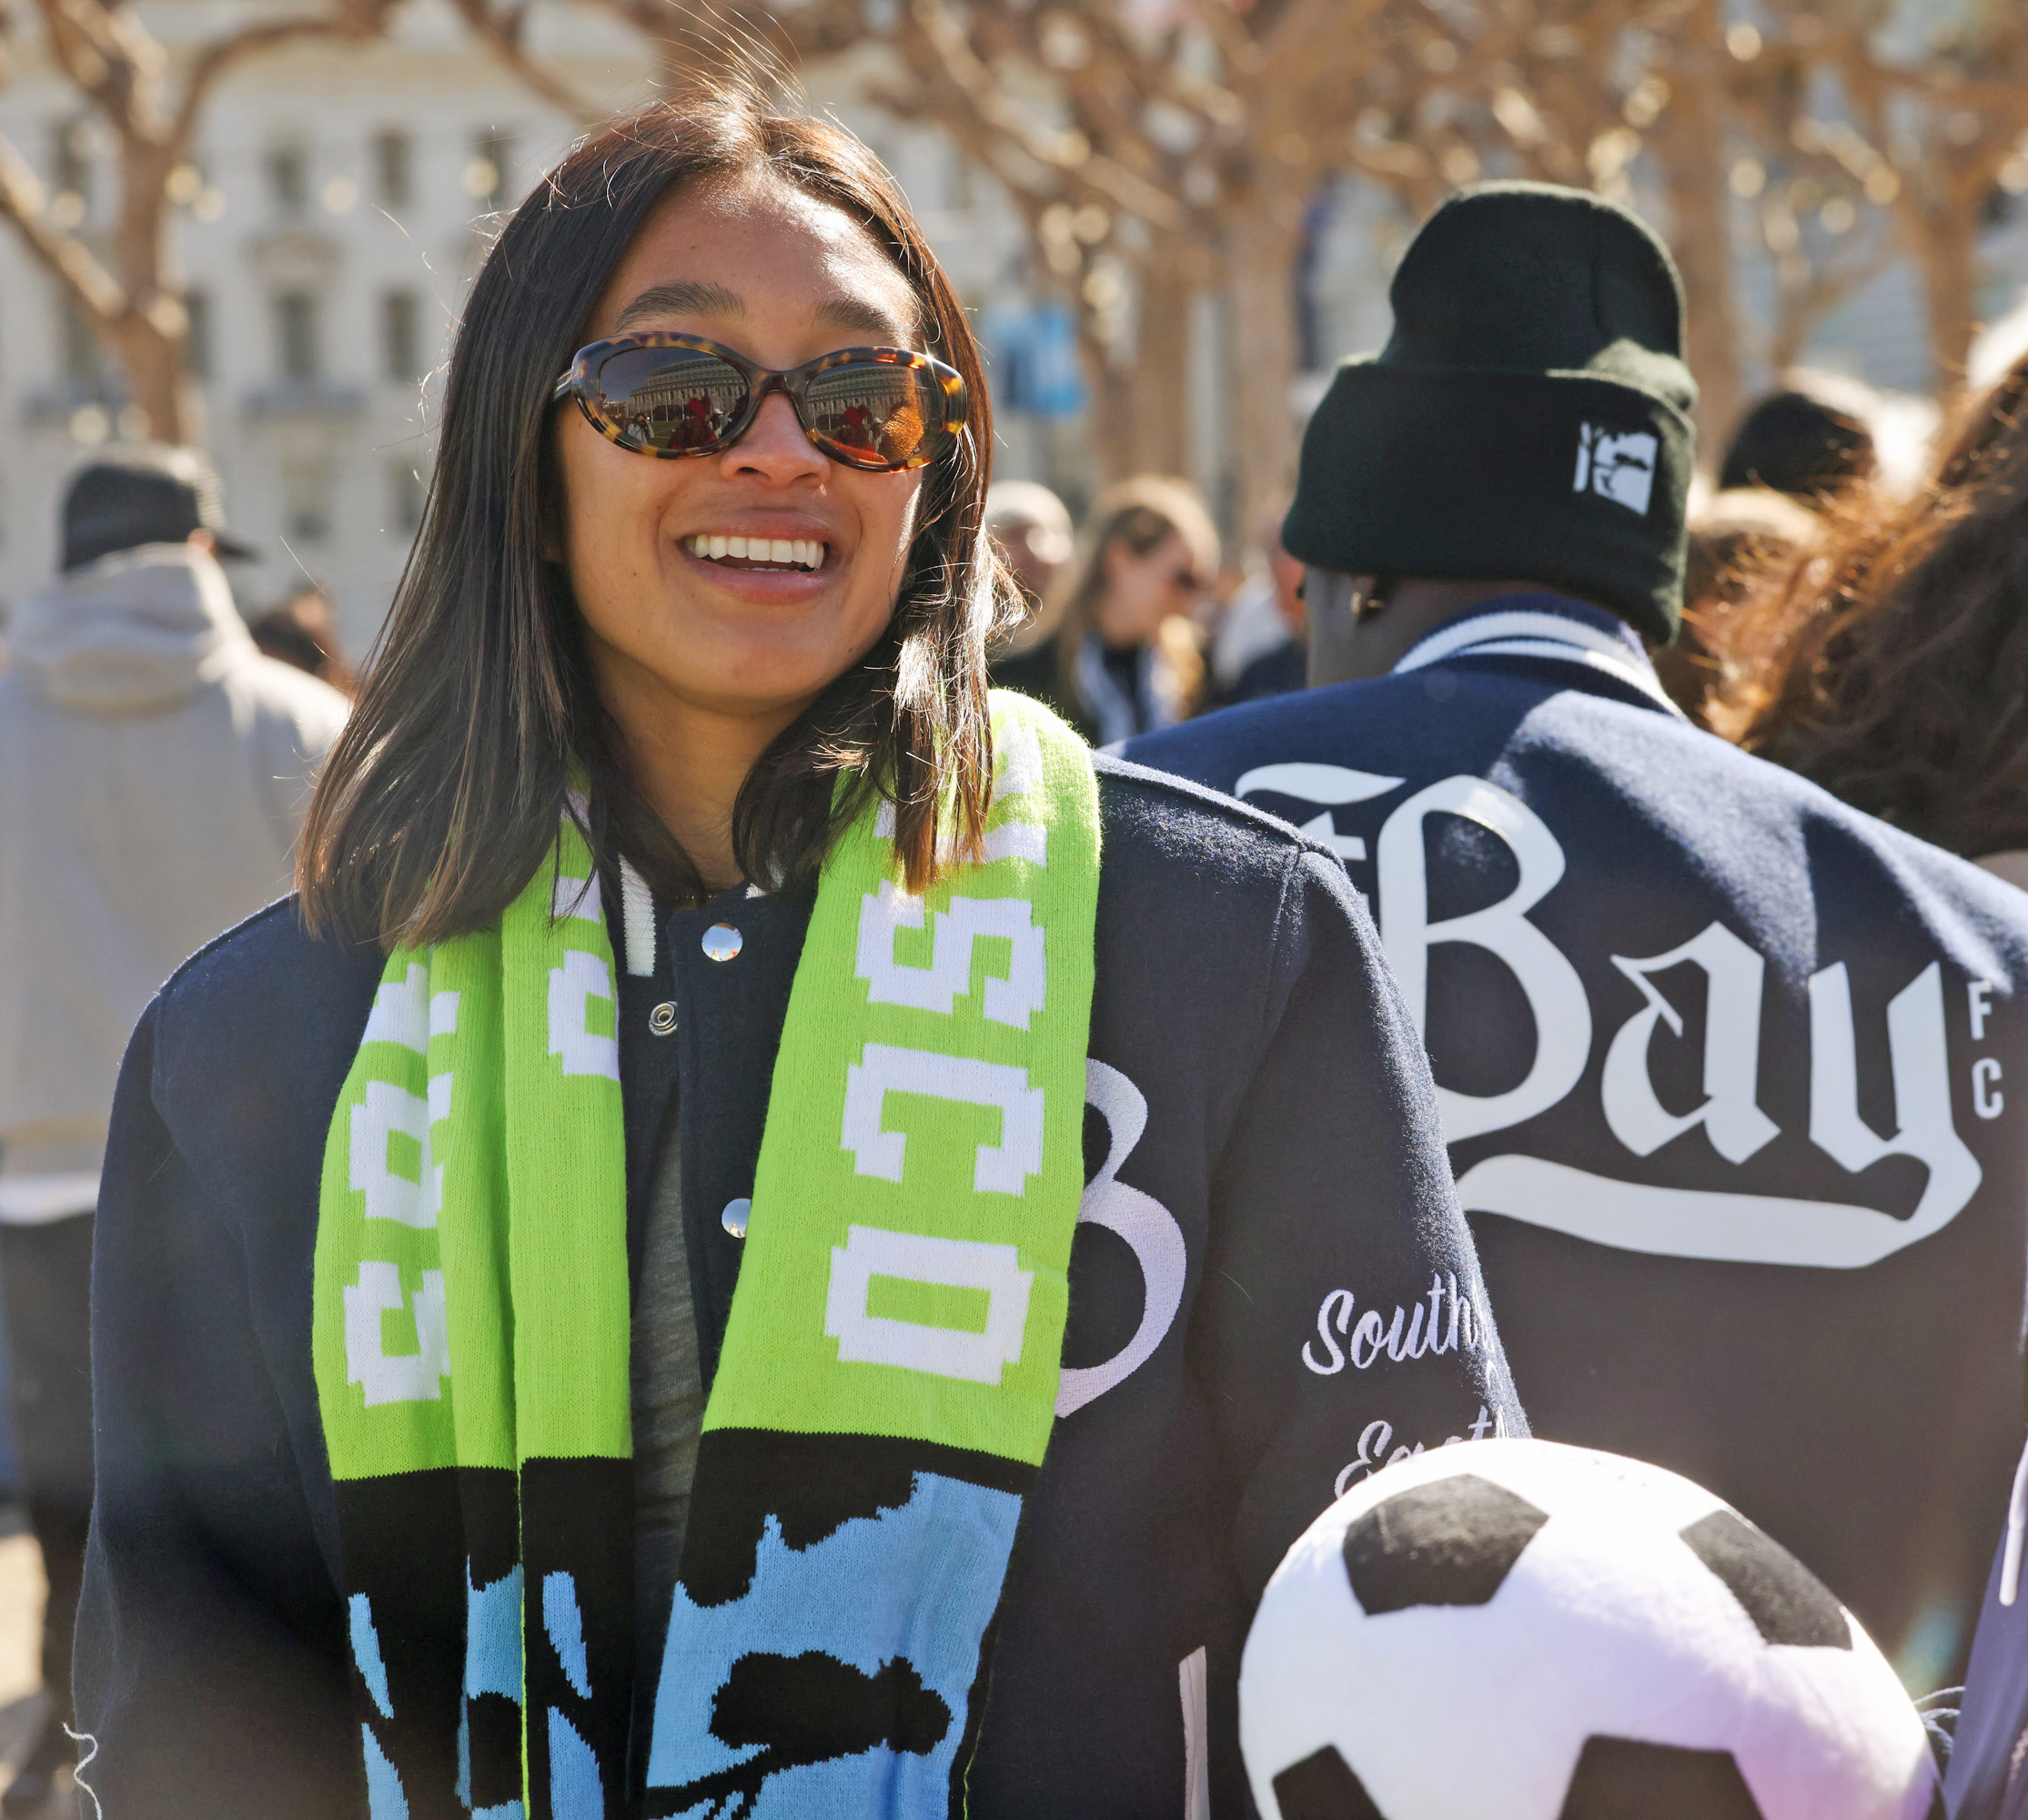 A smiling woman with sunglasses, a colorful scarf, and a soccer ball, with people wearing branded attire in the background.